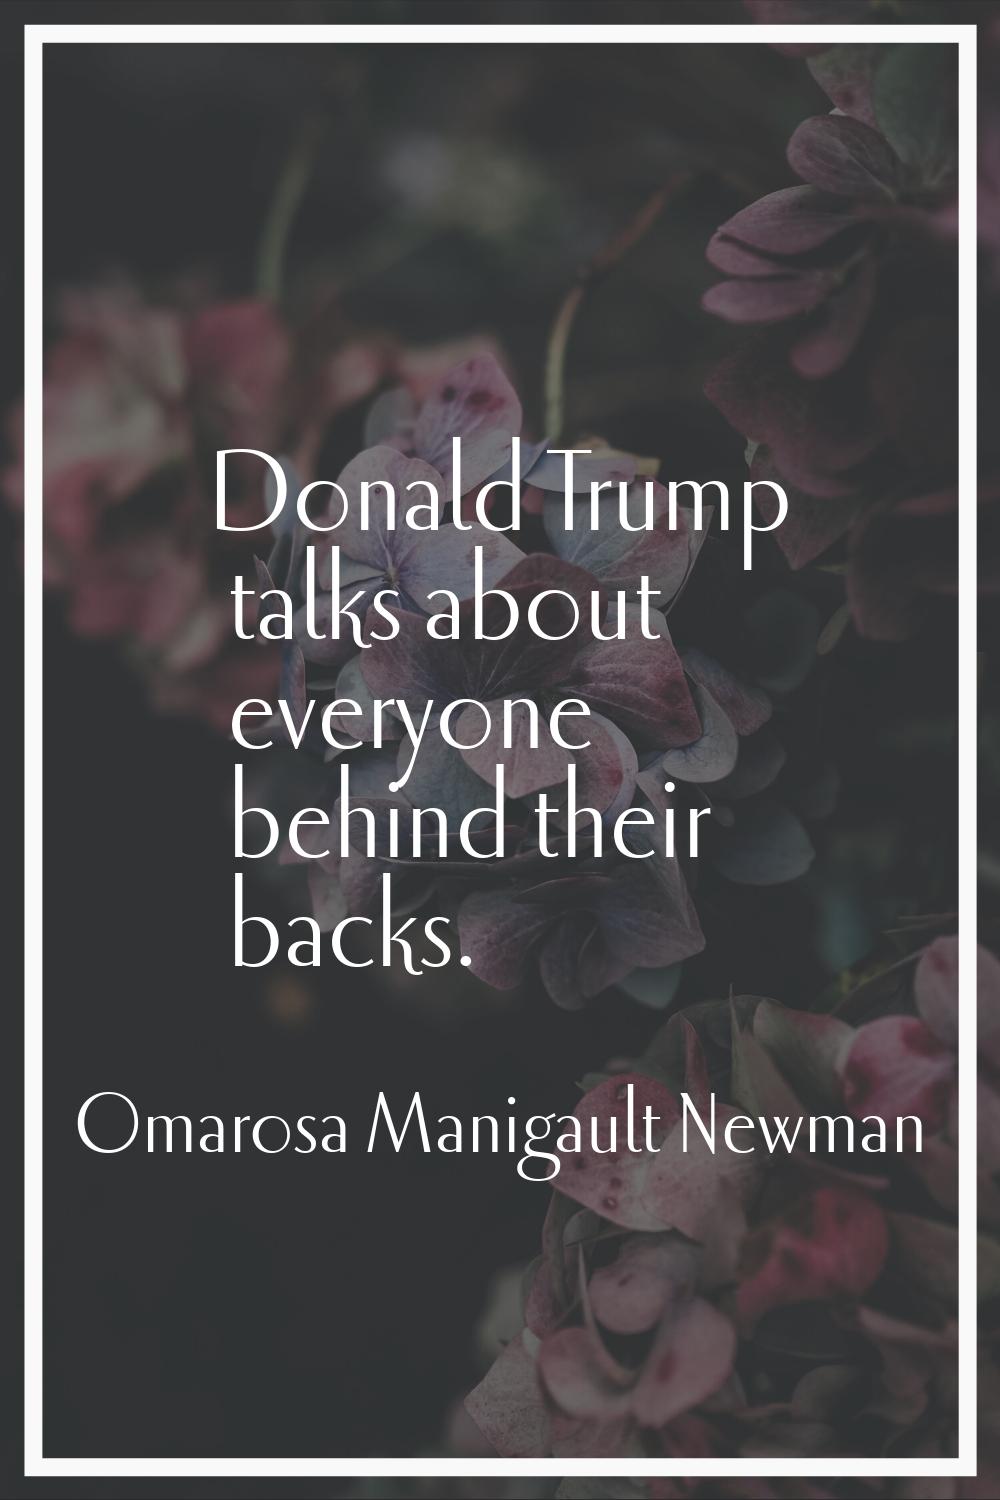 Donald Trump talks about everyone behind their backs.